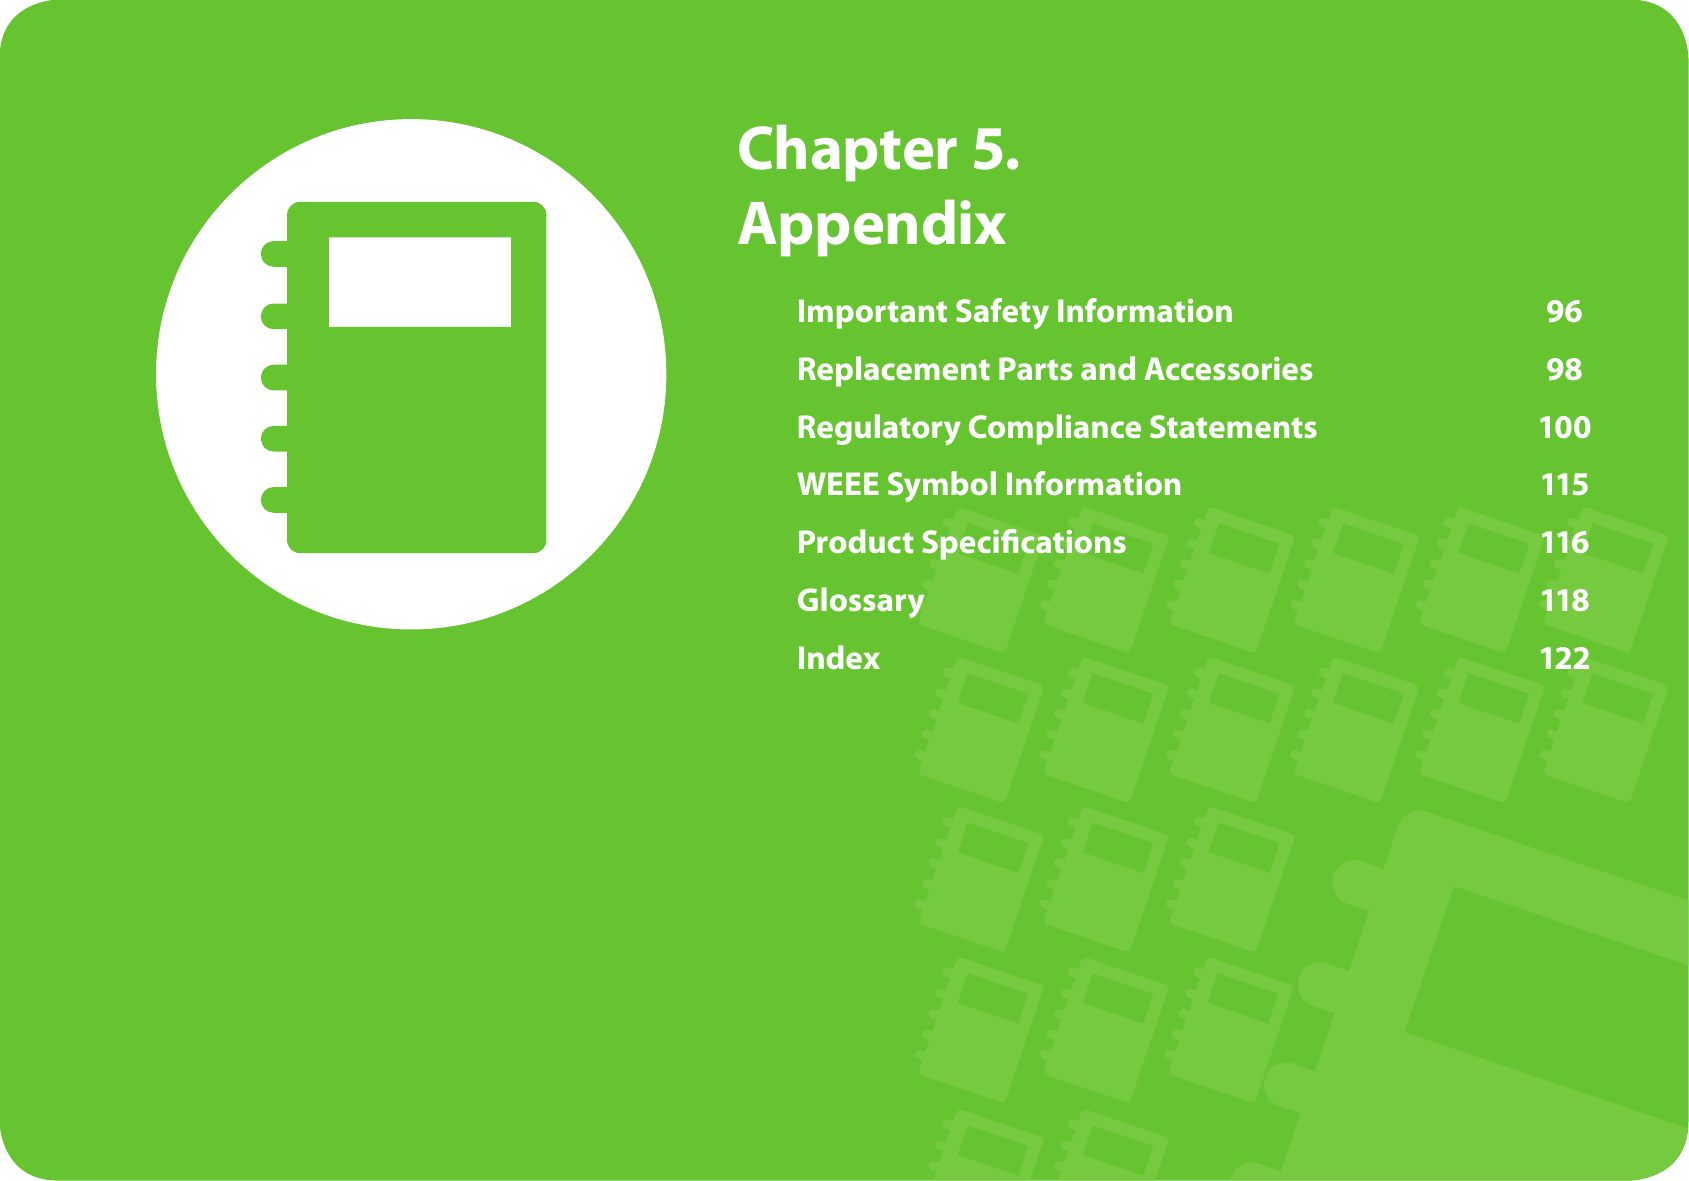  Chapter 5.  AppendixImportant Safety Information  96Replacement Parts and Accessories  98Regulatory Compliance Statements  100WEEE Symbol Information  115Product Speci cations  116Glossary  118Index  122